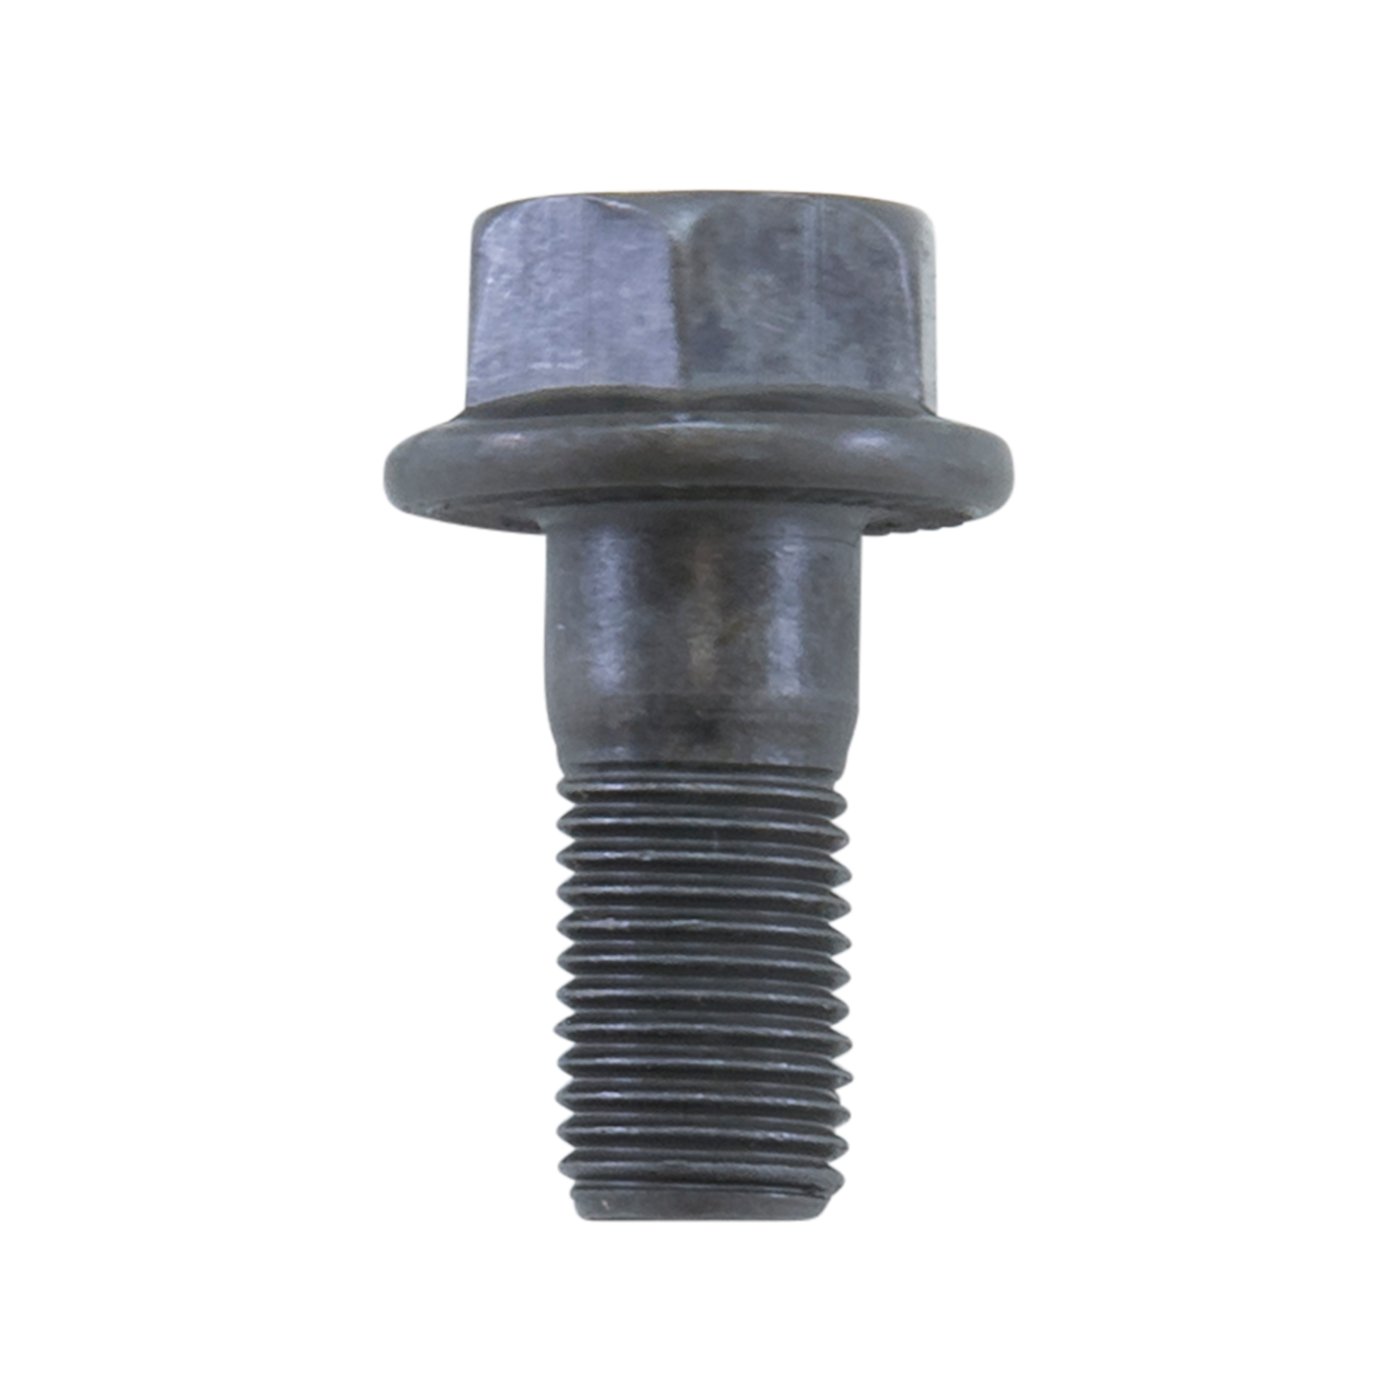 Ring Gear Bolt For Chrysler 7.25 in., 8 in. Ifs, 8.25 in., 8.75 in. & GM 7.2 in. Ifs Front.